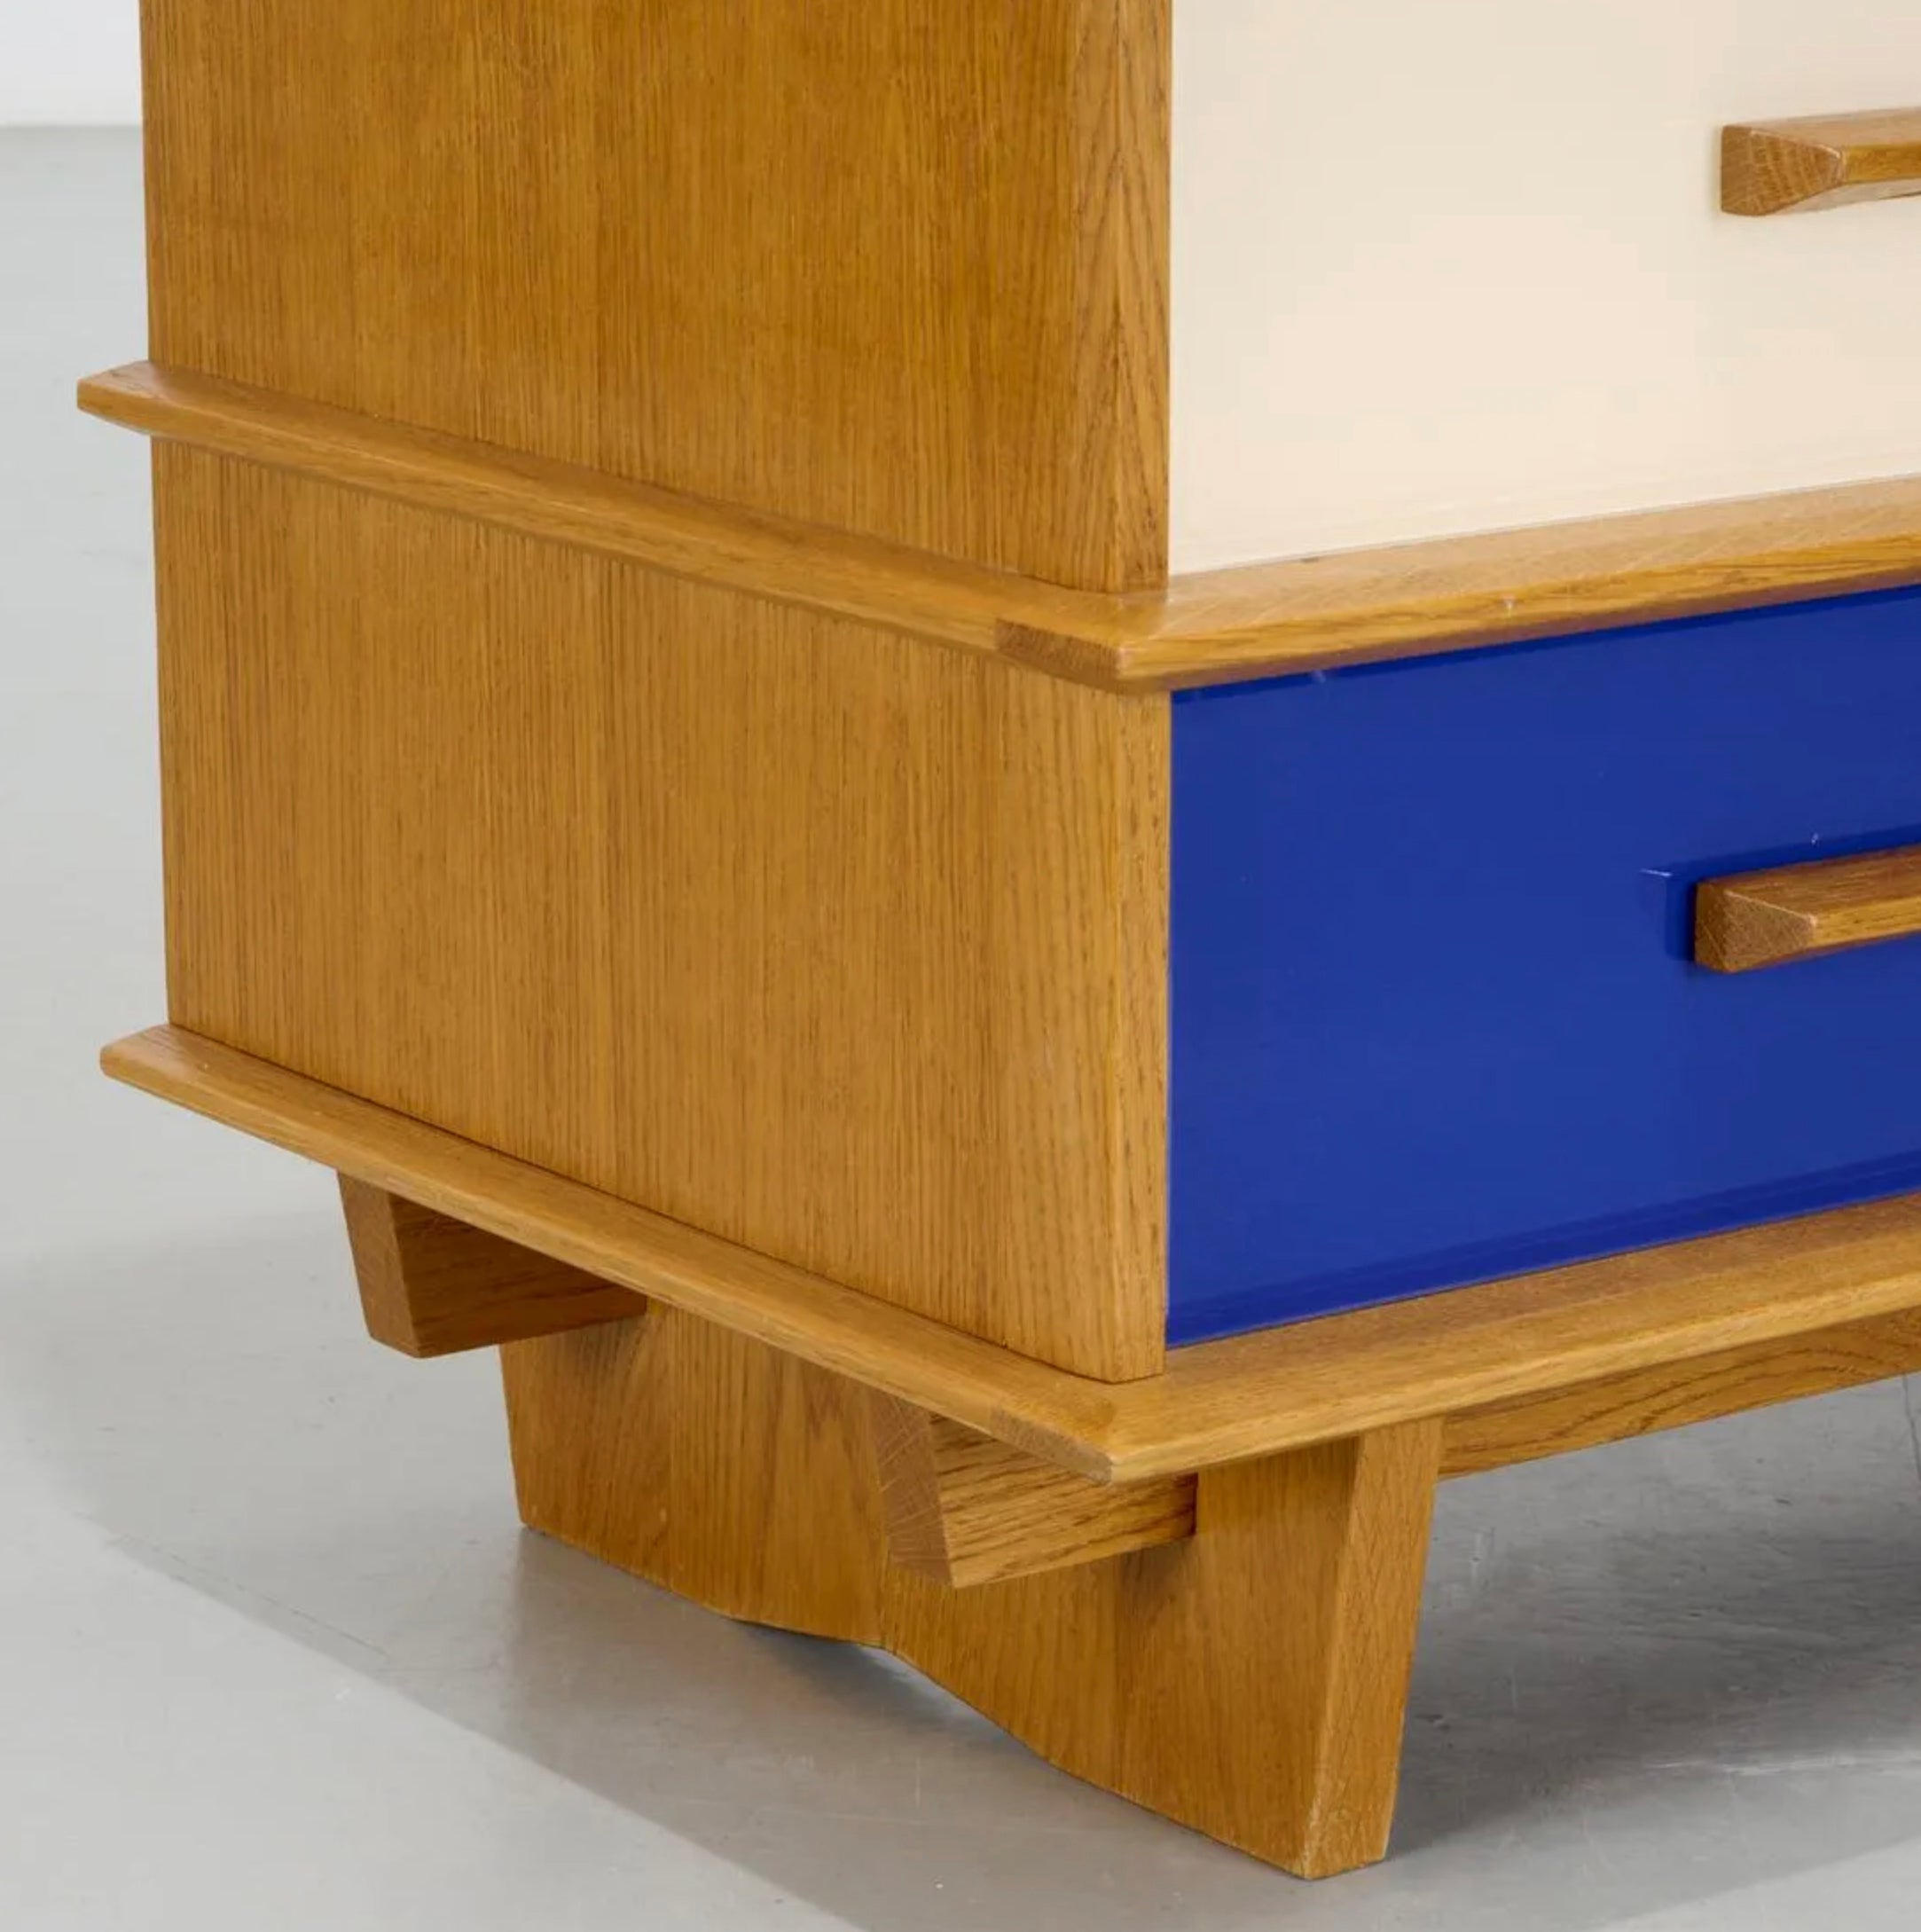 Philipp Markus Pernhaupt, 'Monday-Sunday' dresser, 2009, Vienna. This tall boy chest of drawers is made from solid oak, multi-colored glass, and pulls inscribed/branded with days of the week. Has the playfulness of the Eames ESU combined with the